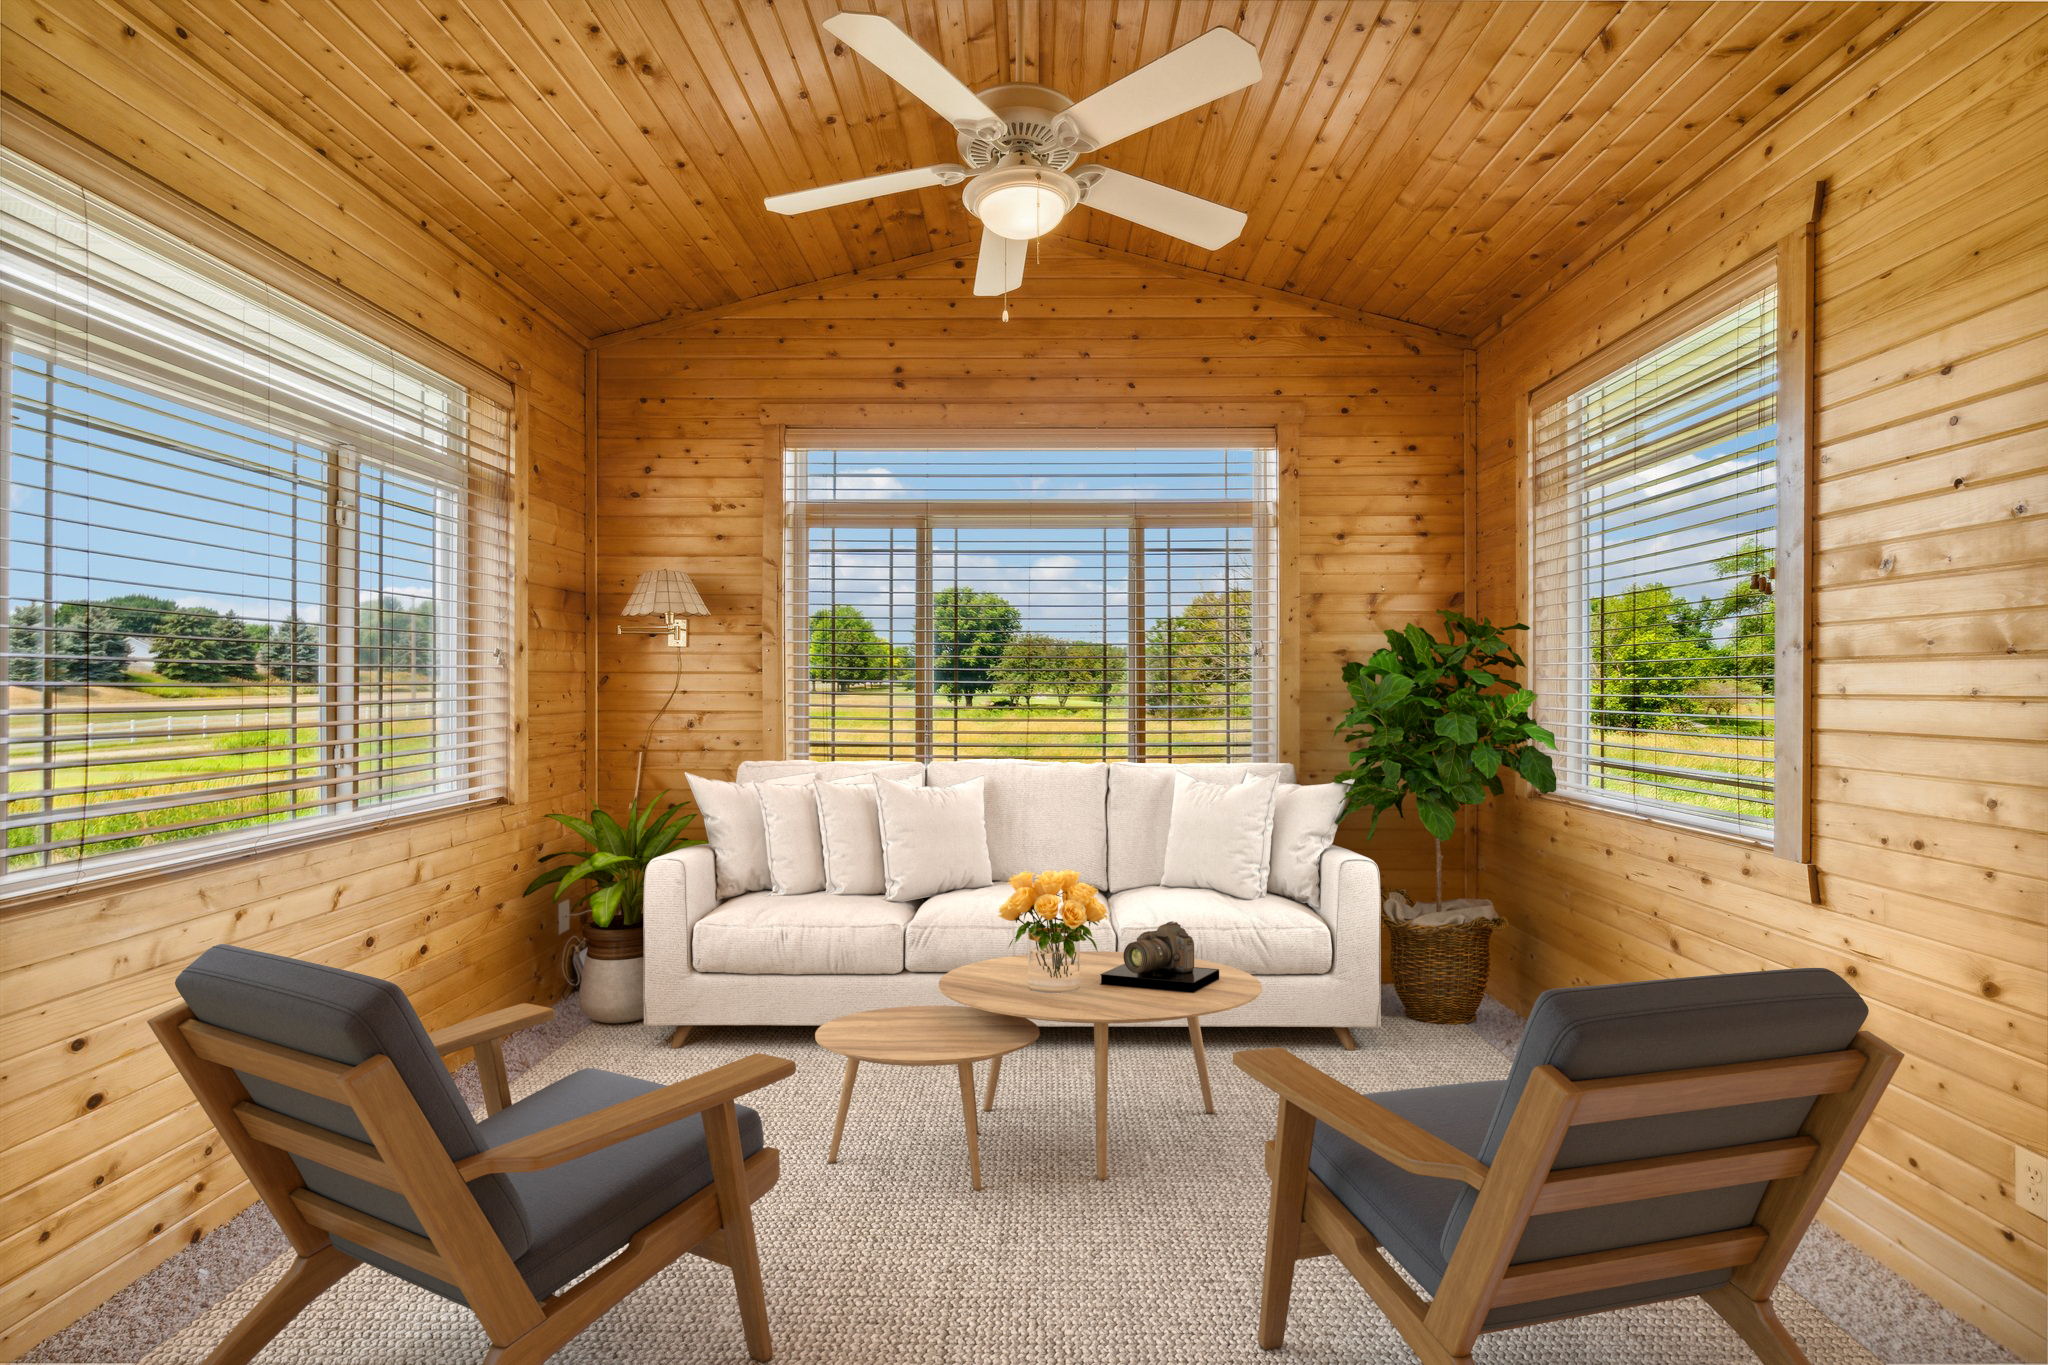 Virtual Staging sunroom or sitting room off primary bedroom